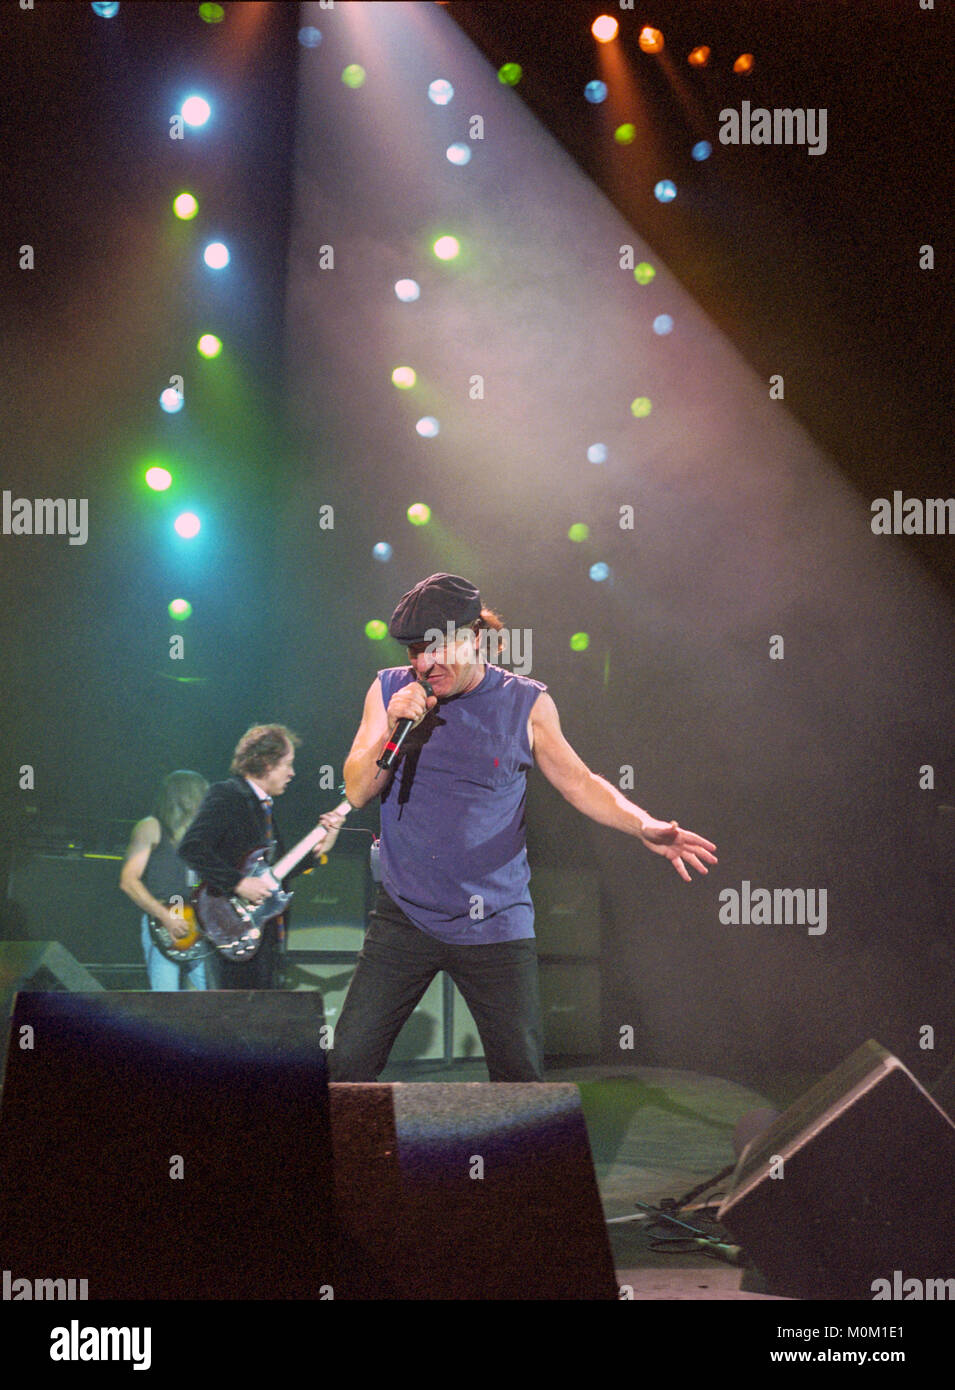 Brian Johnson and Angus Young of Australian Rock group AC/DC performing at the Hammersmith Apollo. 21st October 2003, London, England, United Kingdom. Stock Photo